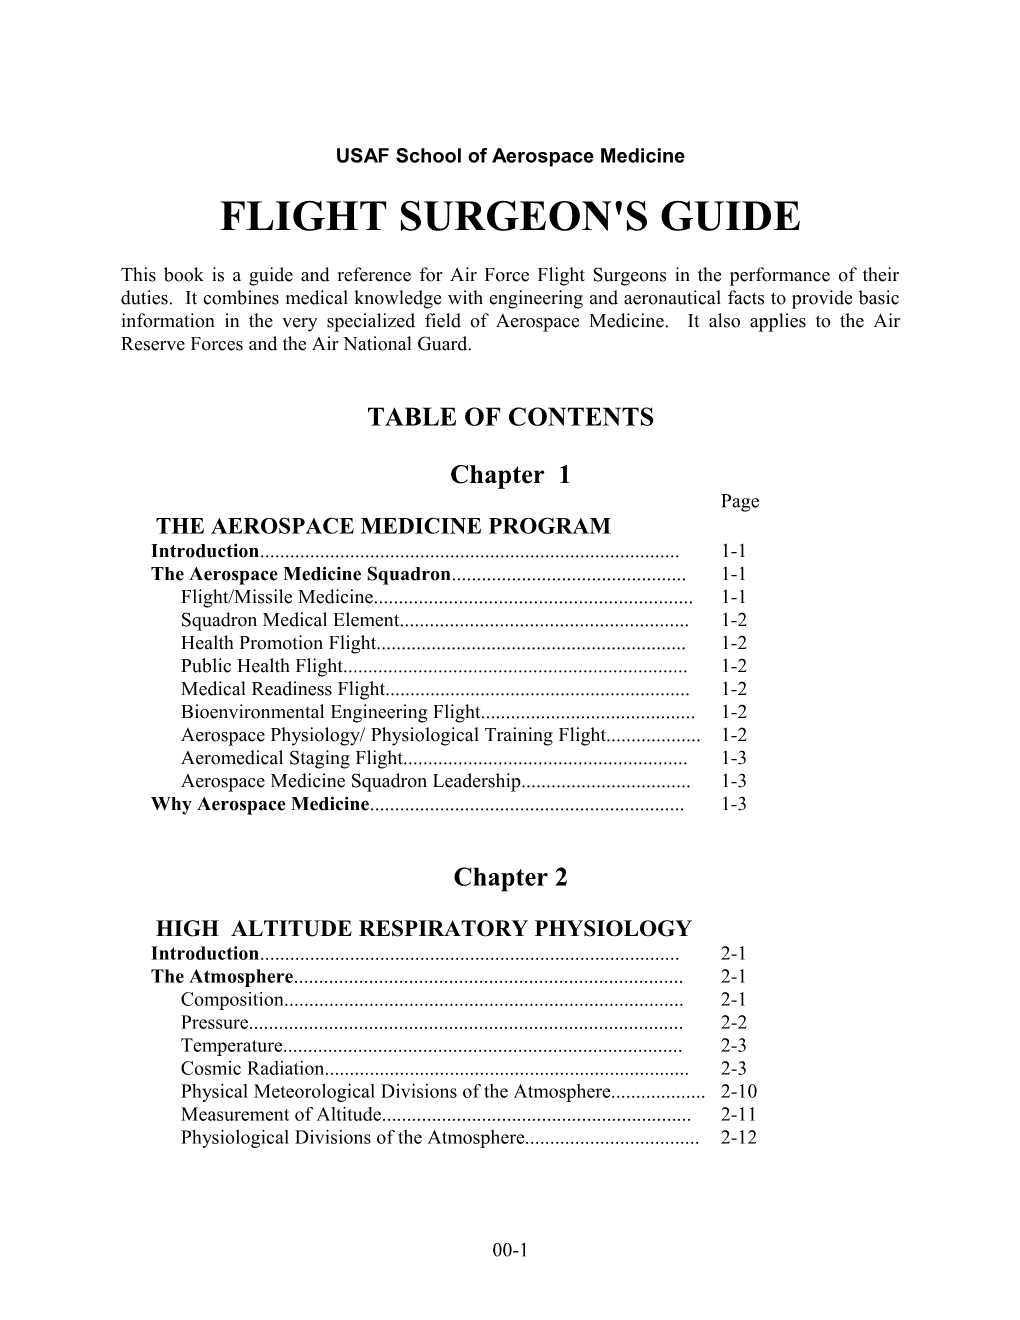 FS Guide Table of Contents